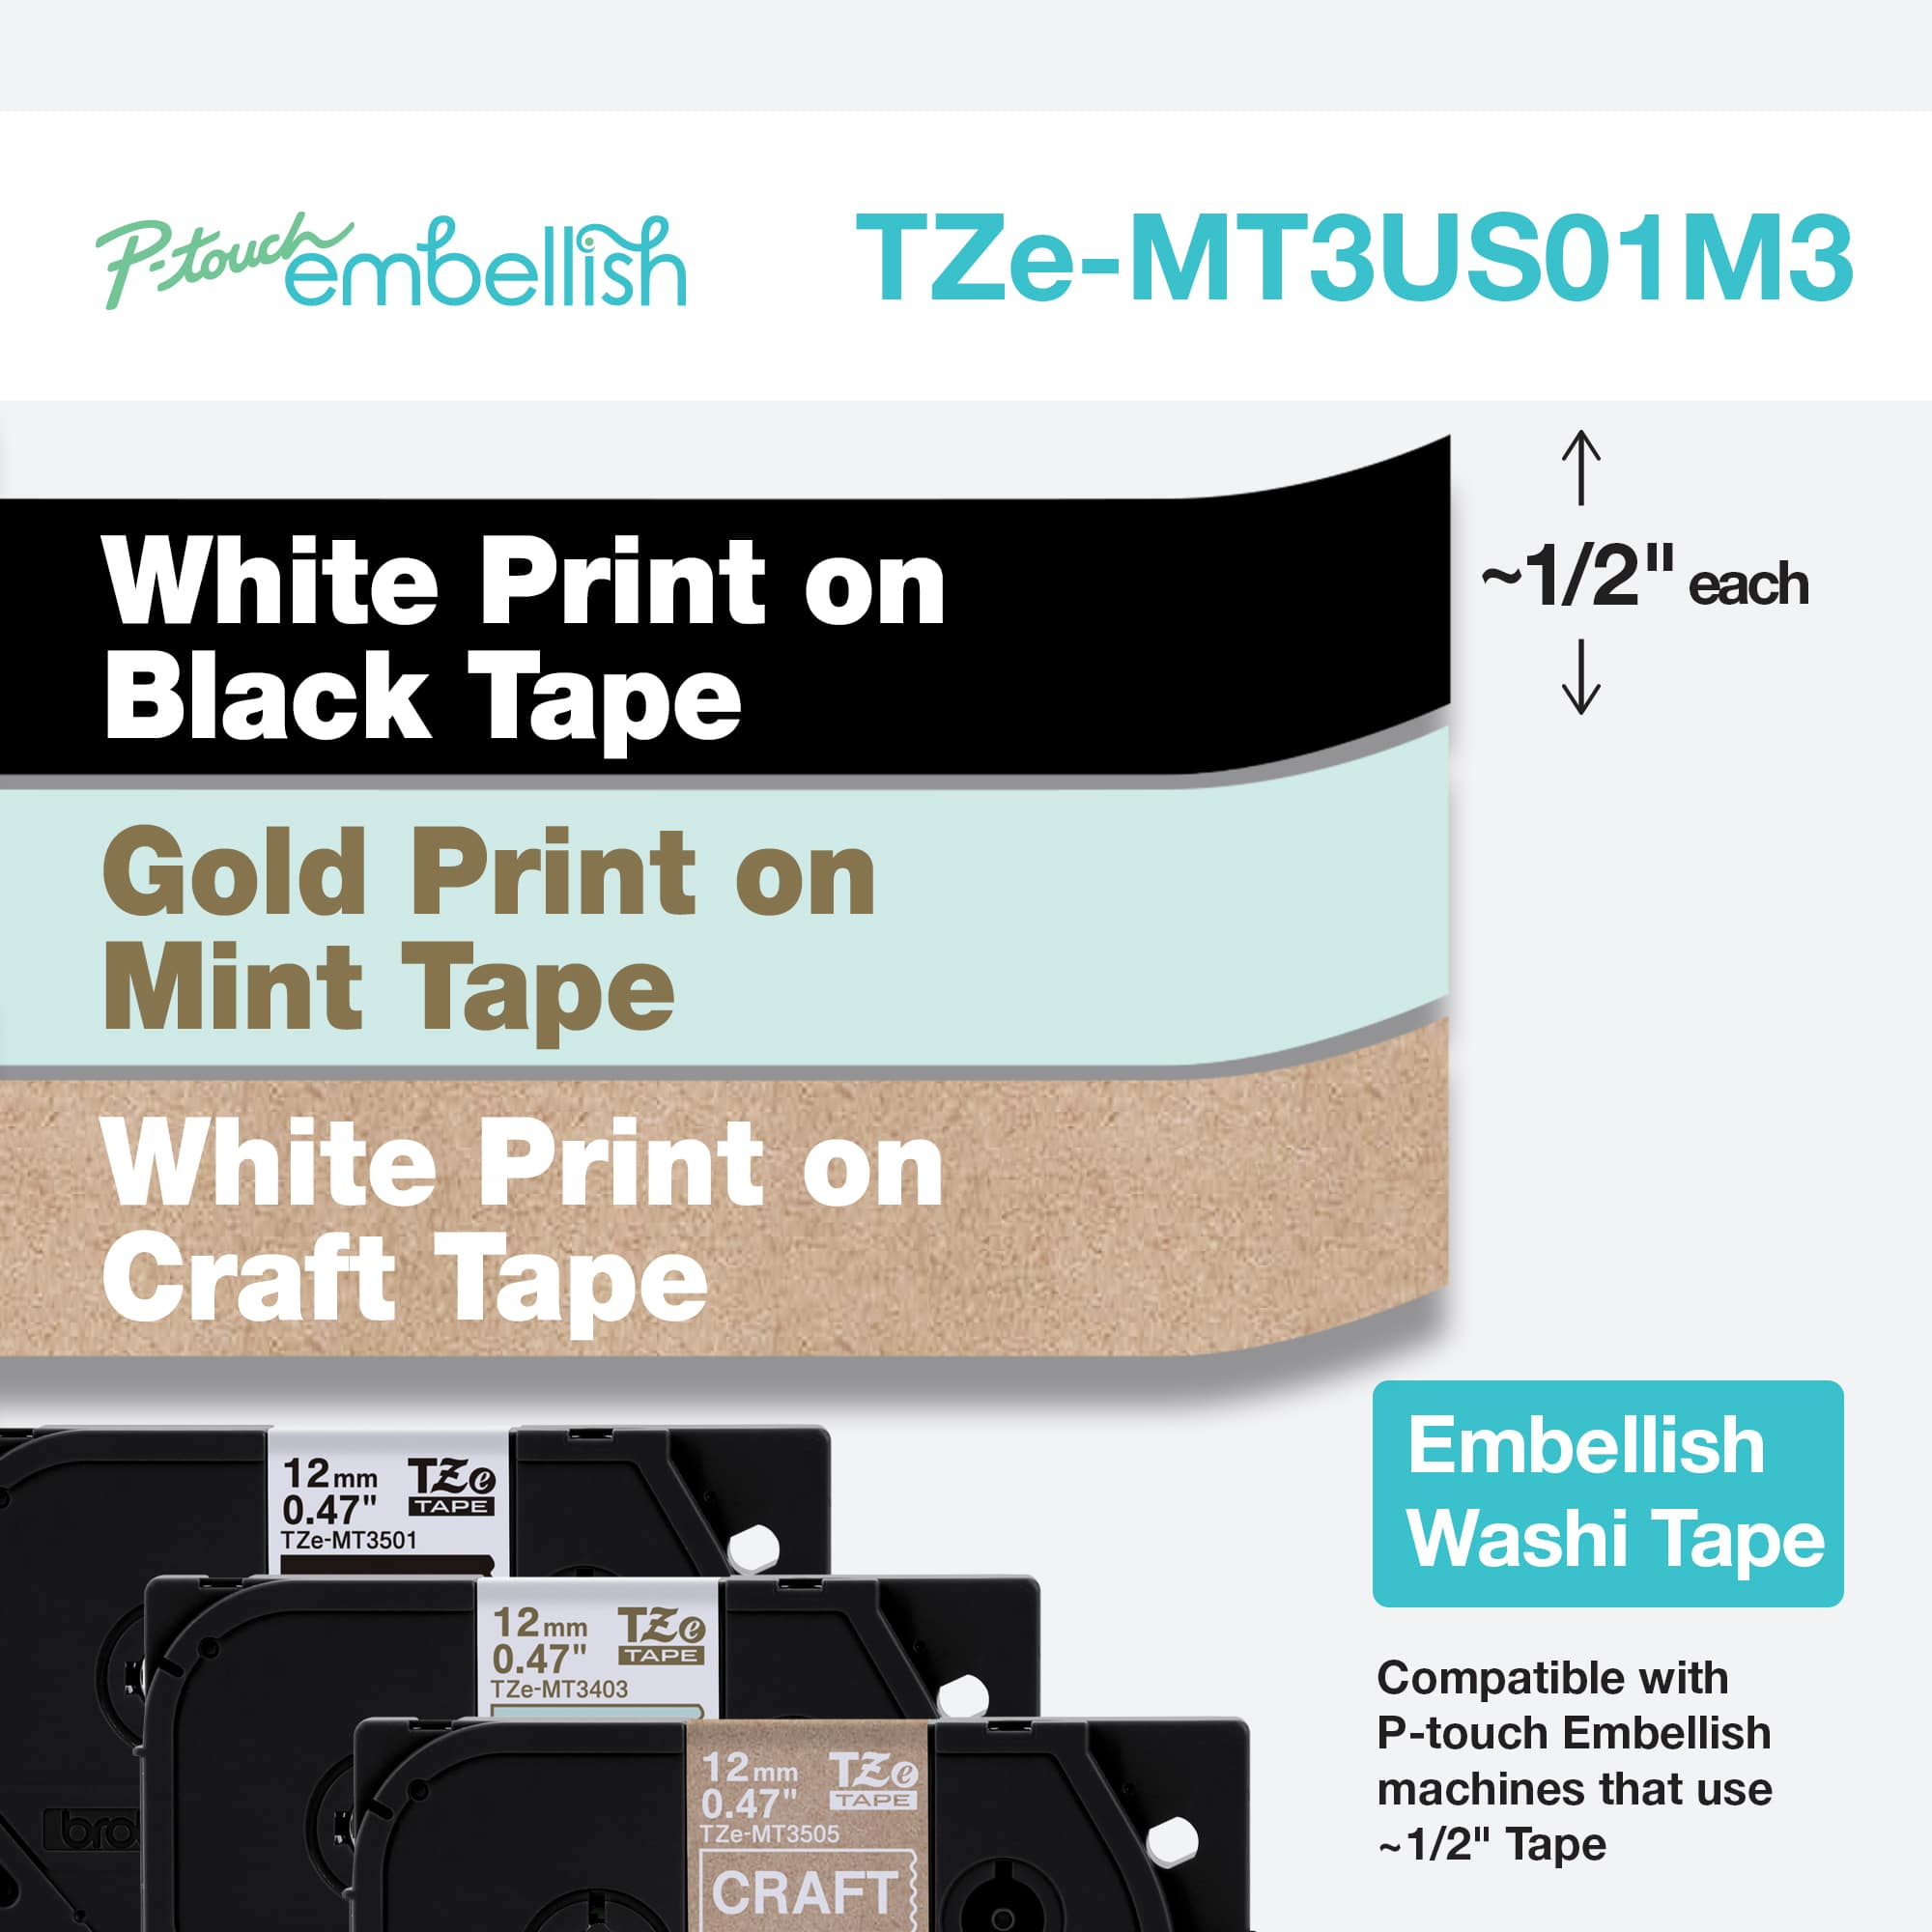 6 Packs: 3 ct. (18 total) Brother P-touch Embellish Multicolor Washi Tape